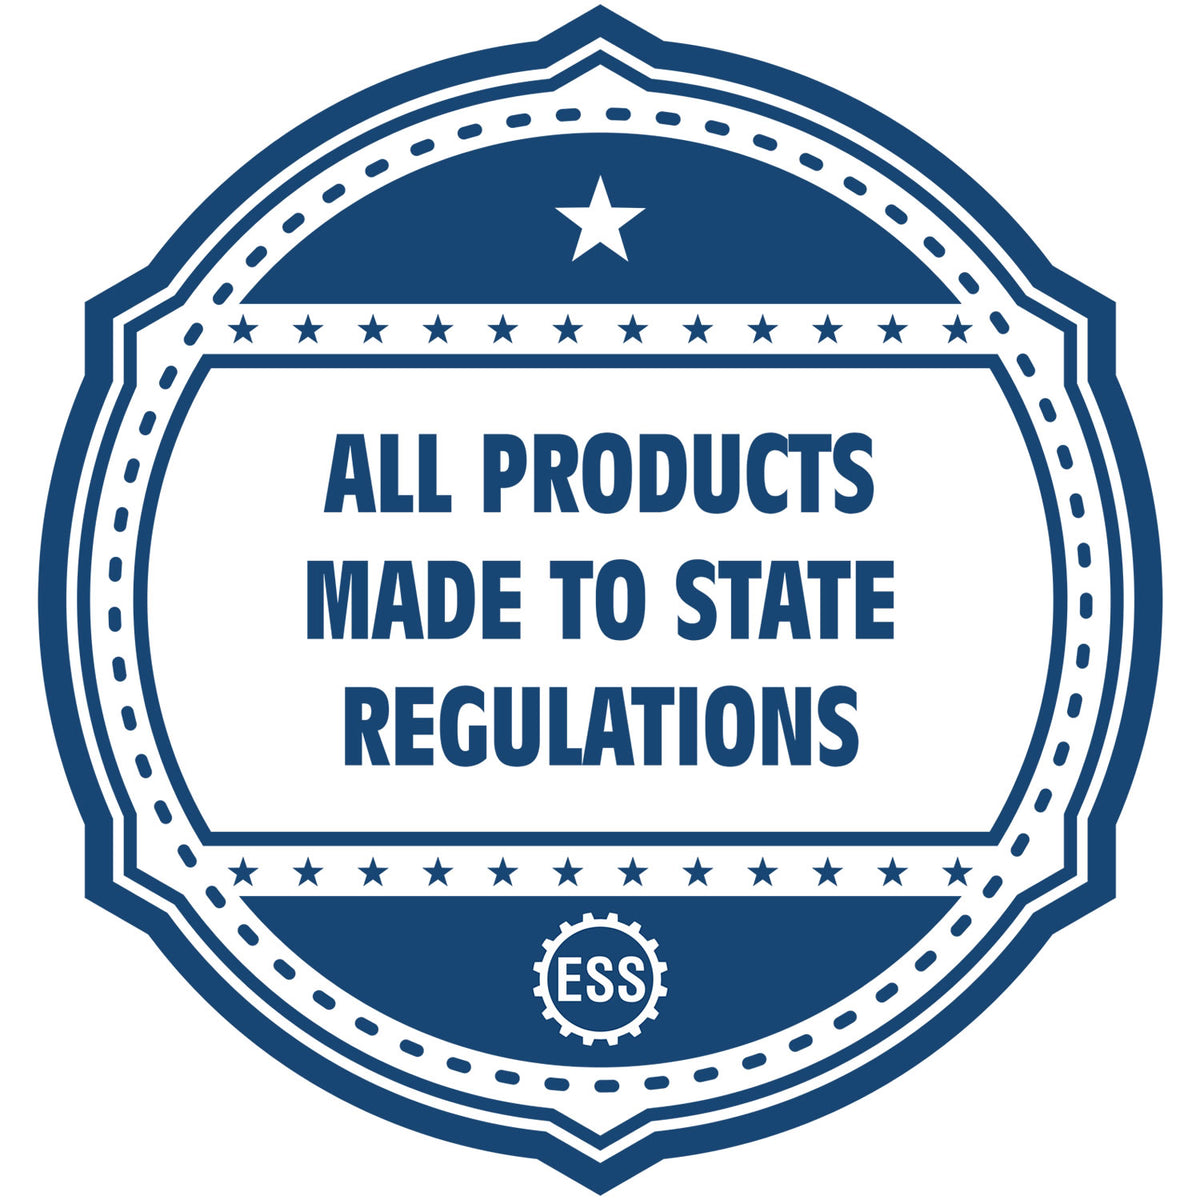 An icon or badge element for the Self-Inking Wisconsin PE Stamp showing that this product is made in compliance with state regulations.